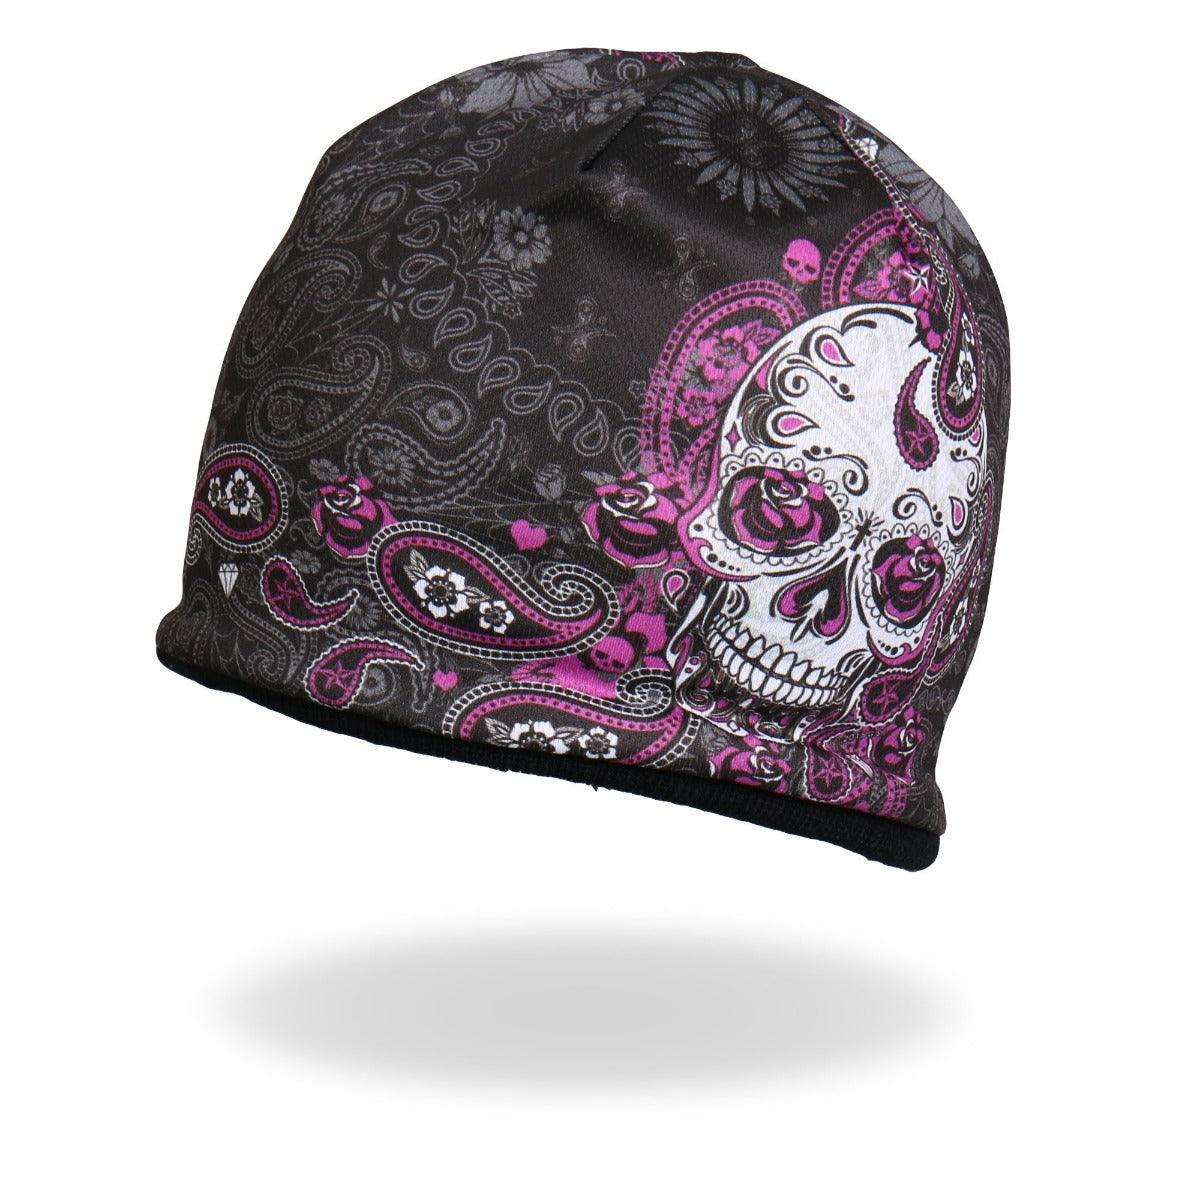 Hot Leathers Sublimated Sugar Paisley 2 Beanie - American Legend Rider